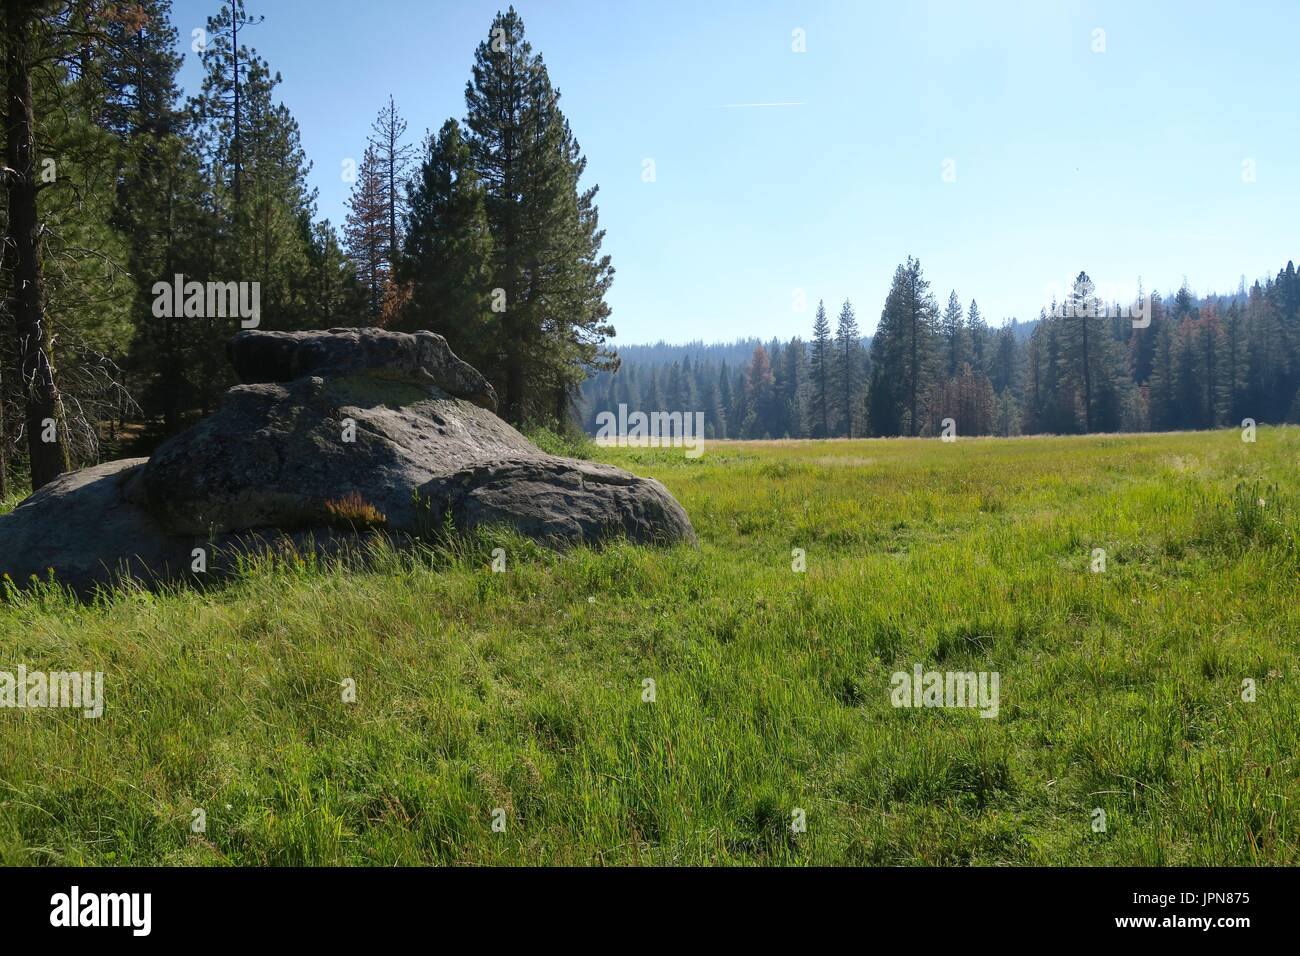 Large boulder stands in a high mountain meadow, Indian Basin, Sequoia National Park, California, United States Stock Photo